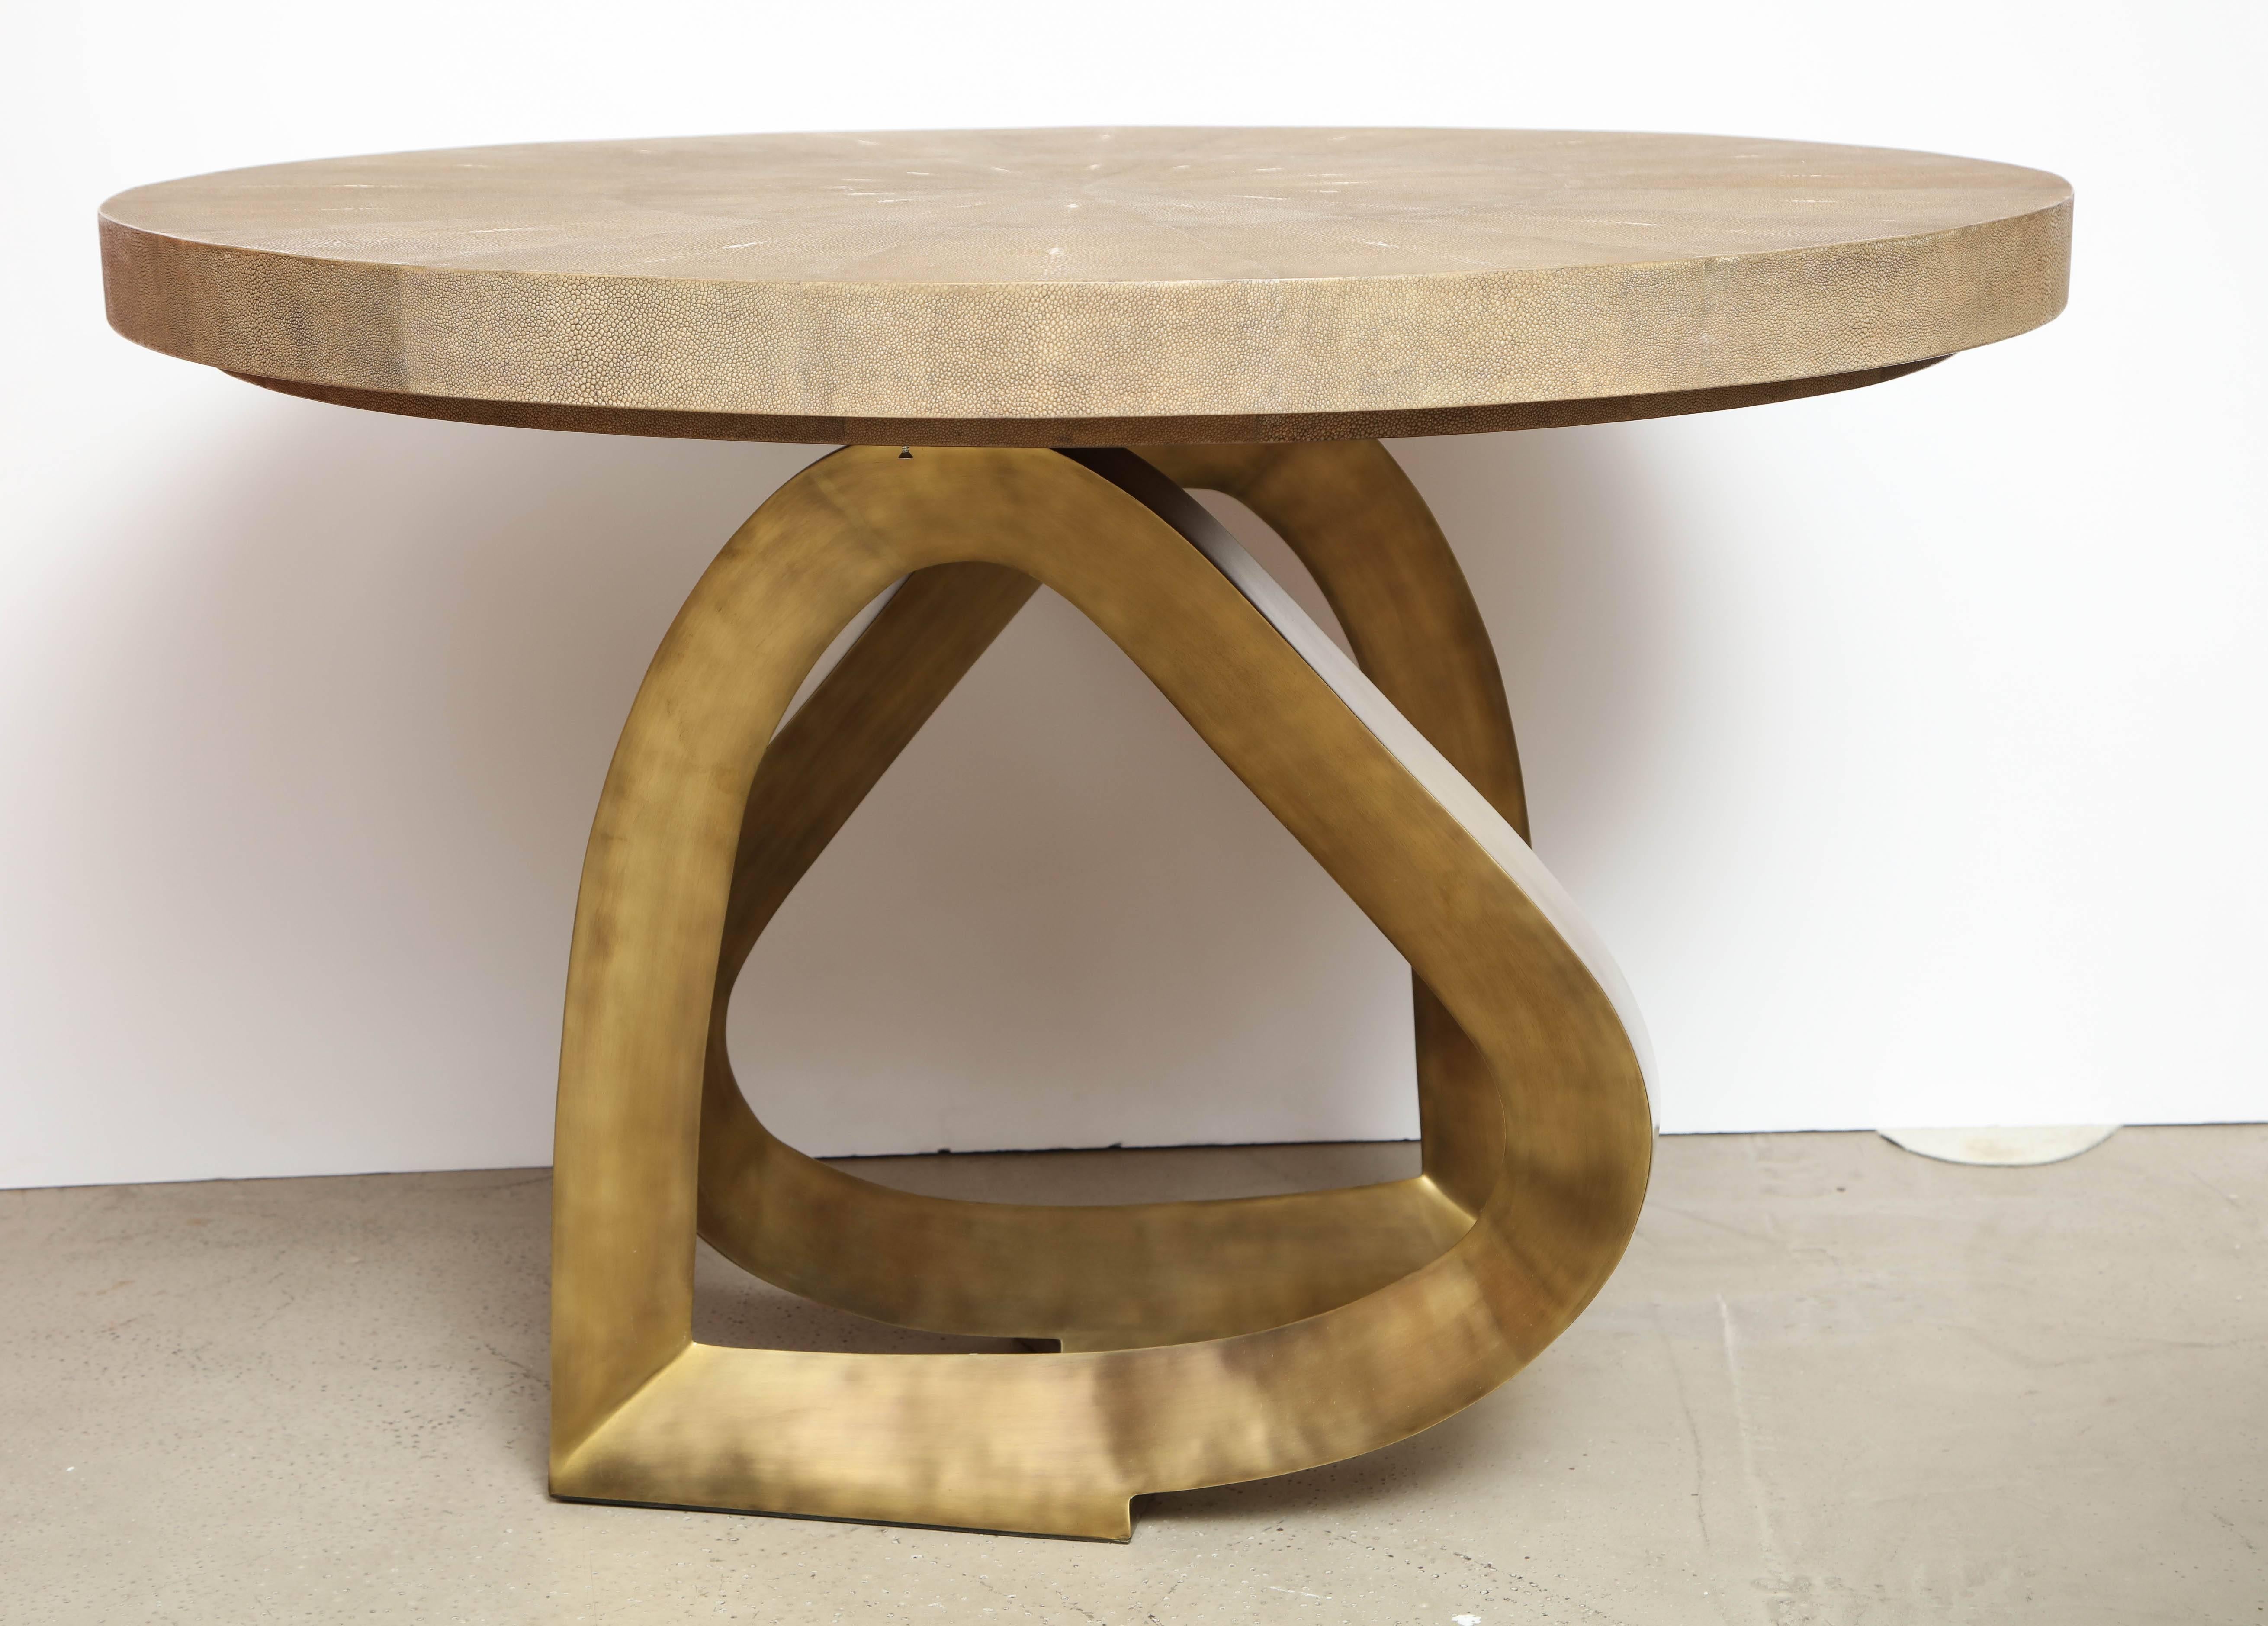 Philippine Shagreen Dining Room Table with Brass Base, Contemporary, Khaki Color Shagreen